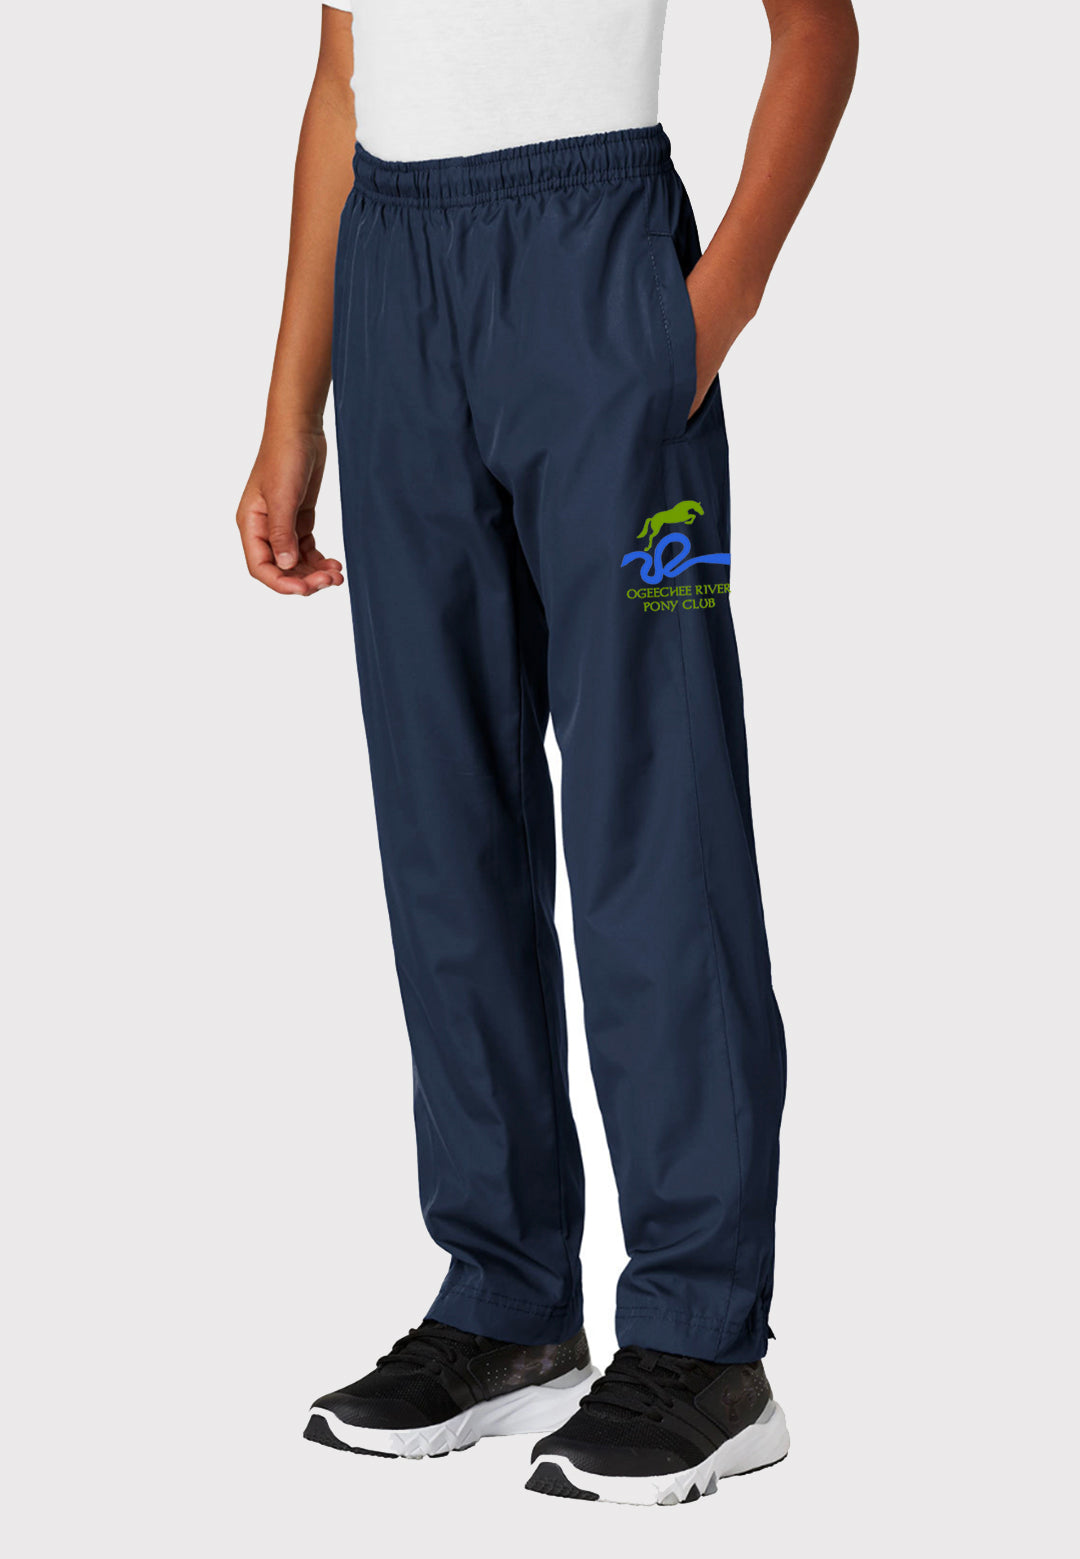 Ogeechee River Pony Club Sport-Tek® Pull-On Wind Pant  - Youth Sizes